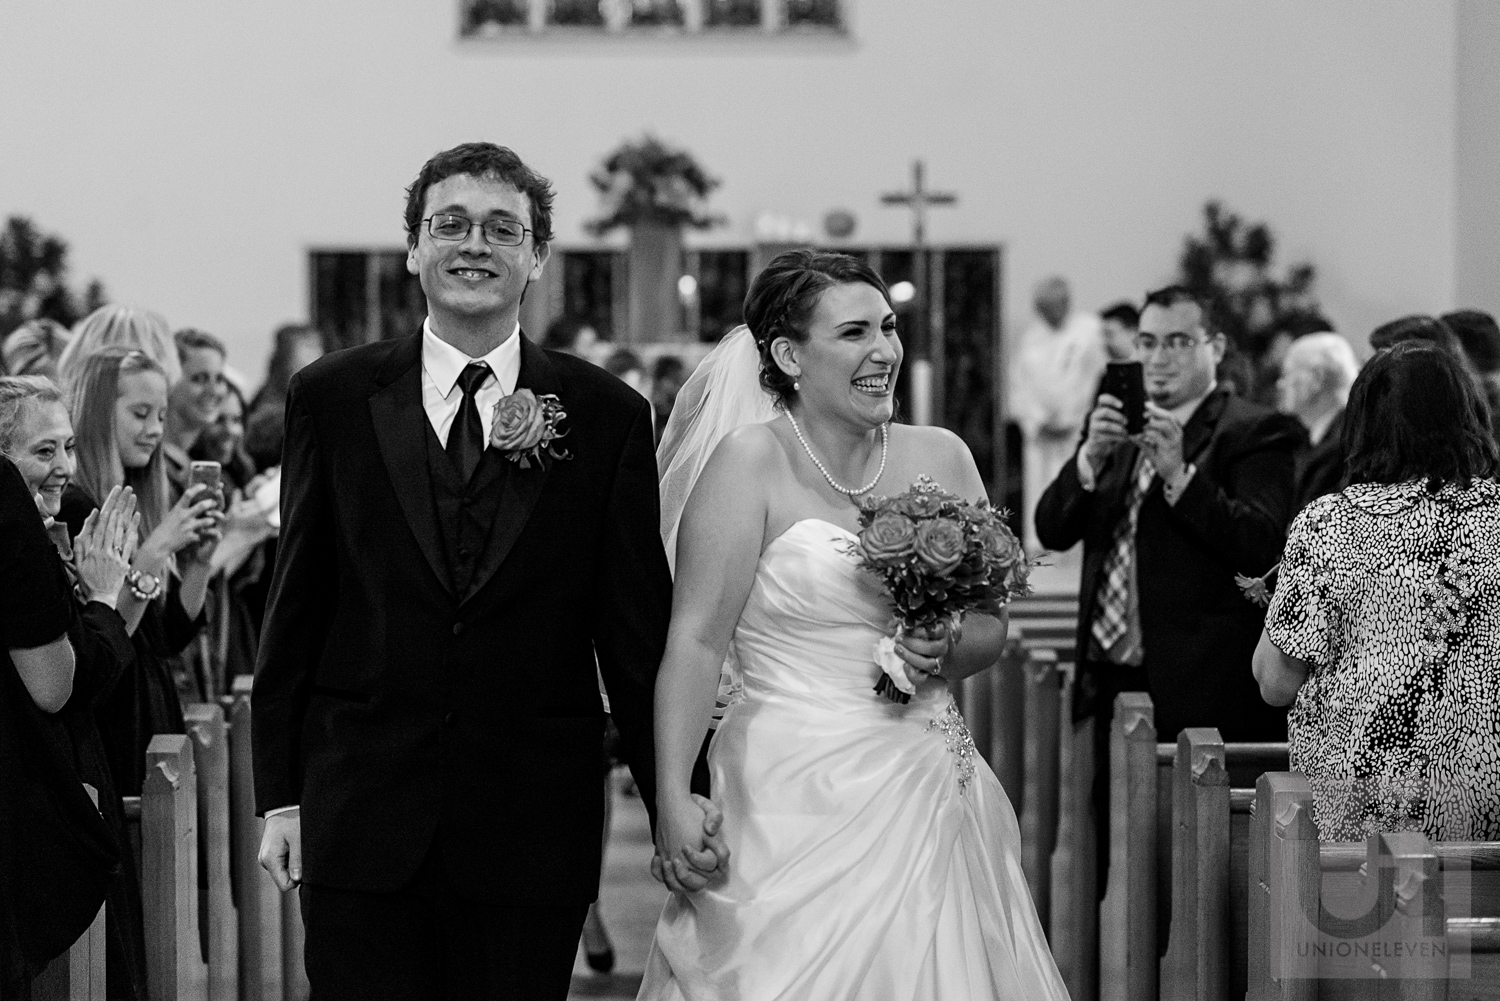 The bride and groom walking down the aisle as husband and wife